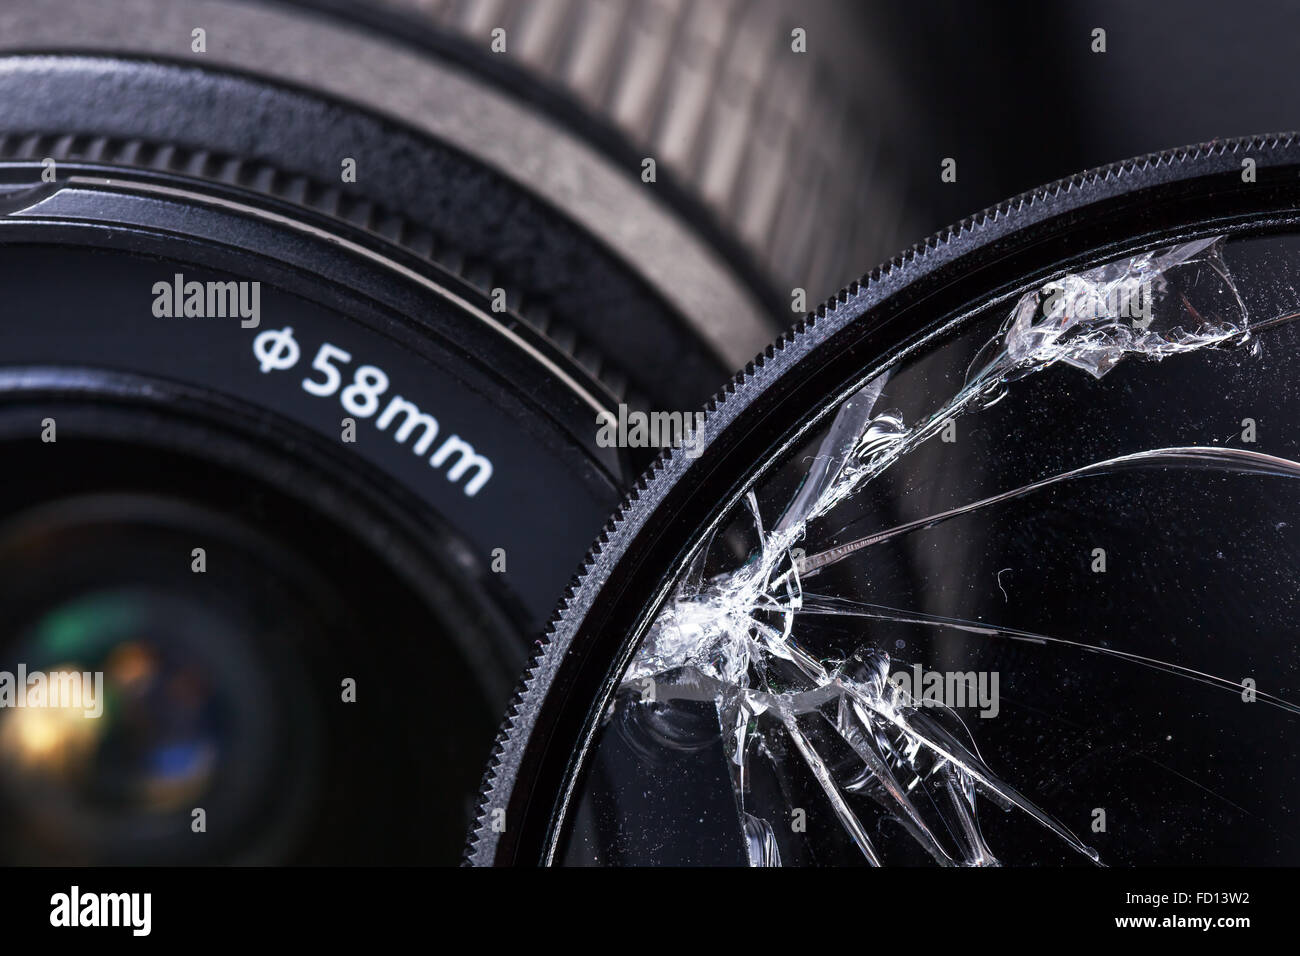 Broken glass, damaged equipment for photographing - the loss and failure Stock Photo